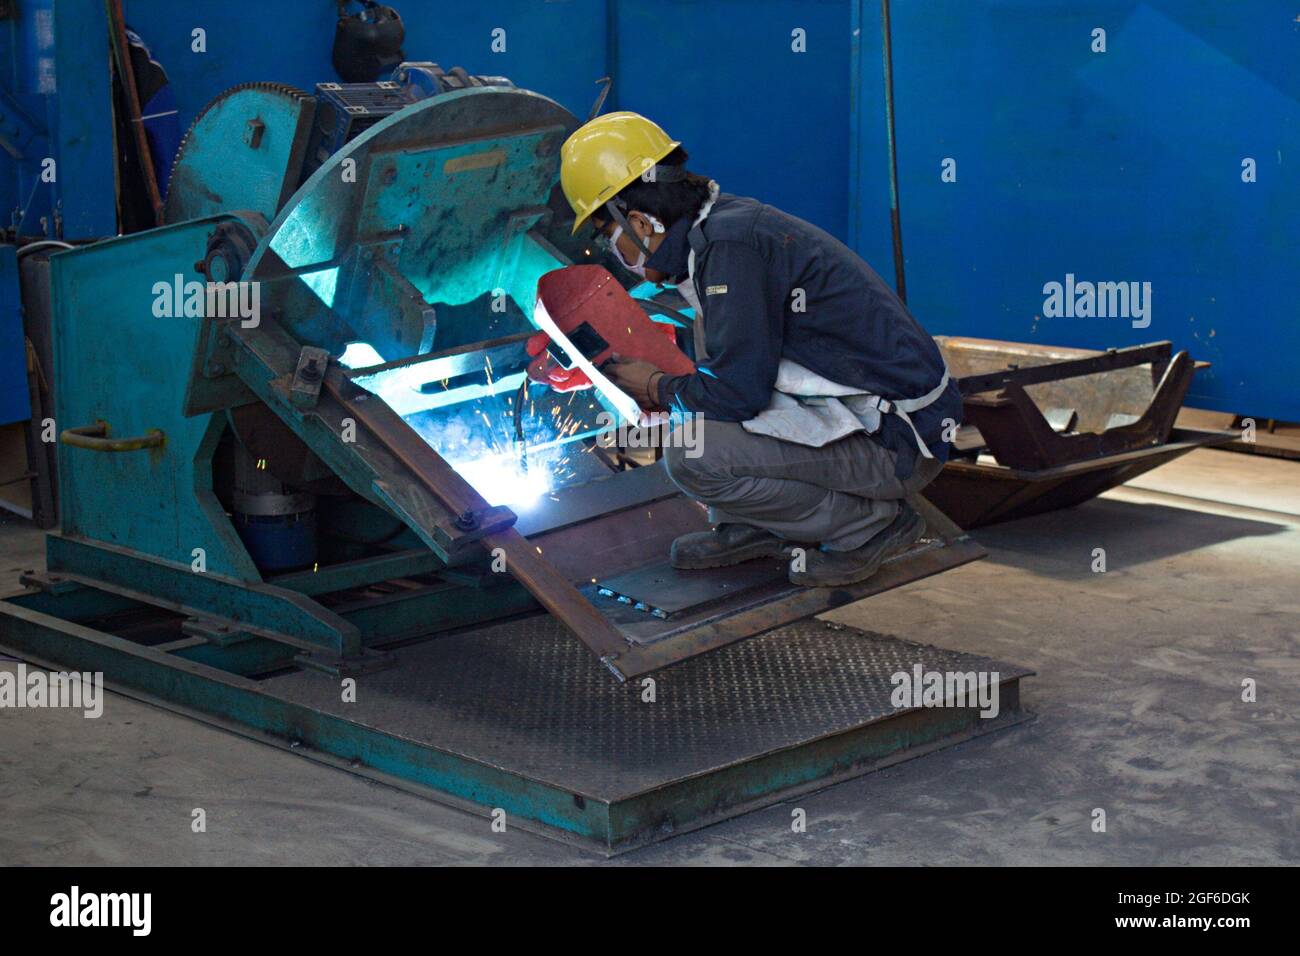 A welder is using an electric arc welding machine in a fabrication workshop. Stock Photo